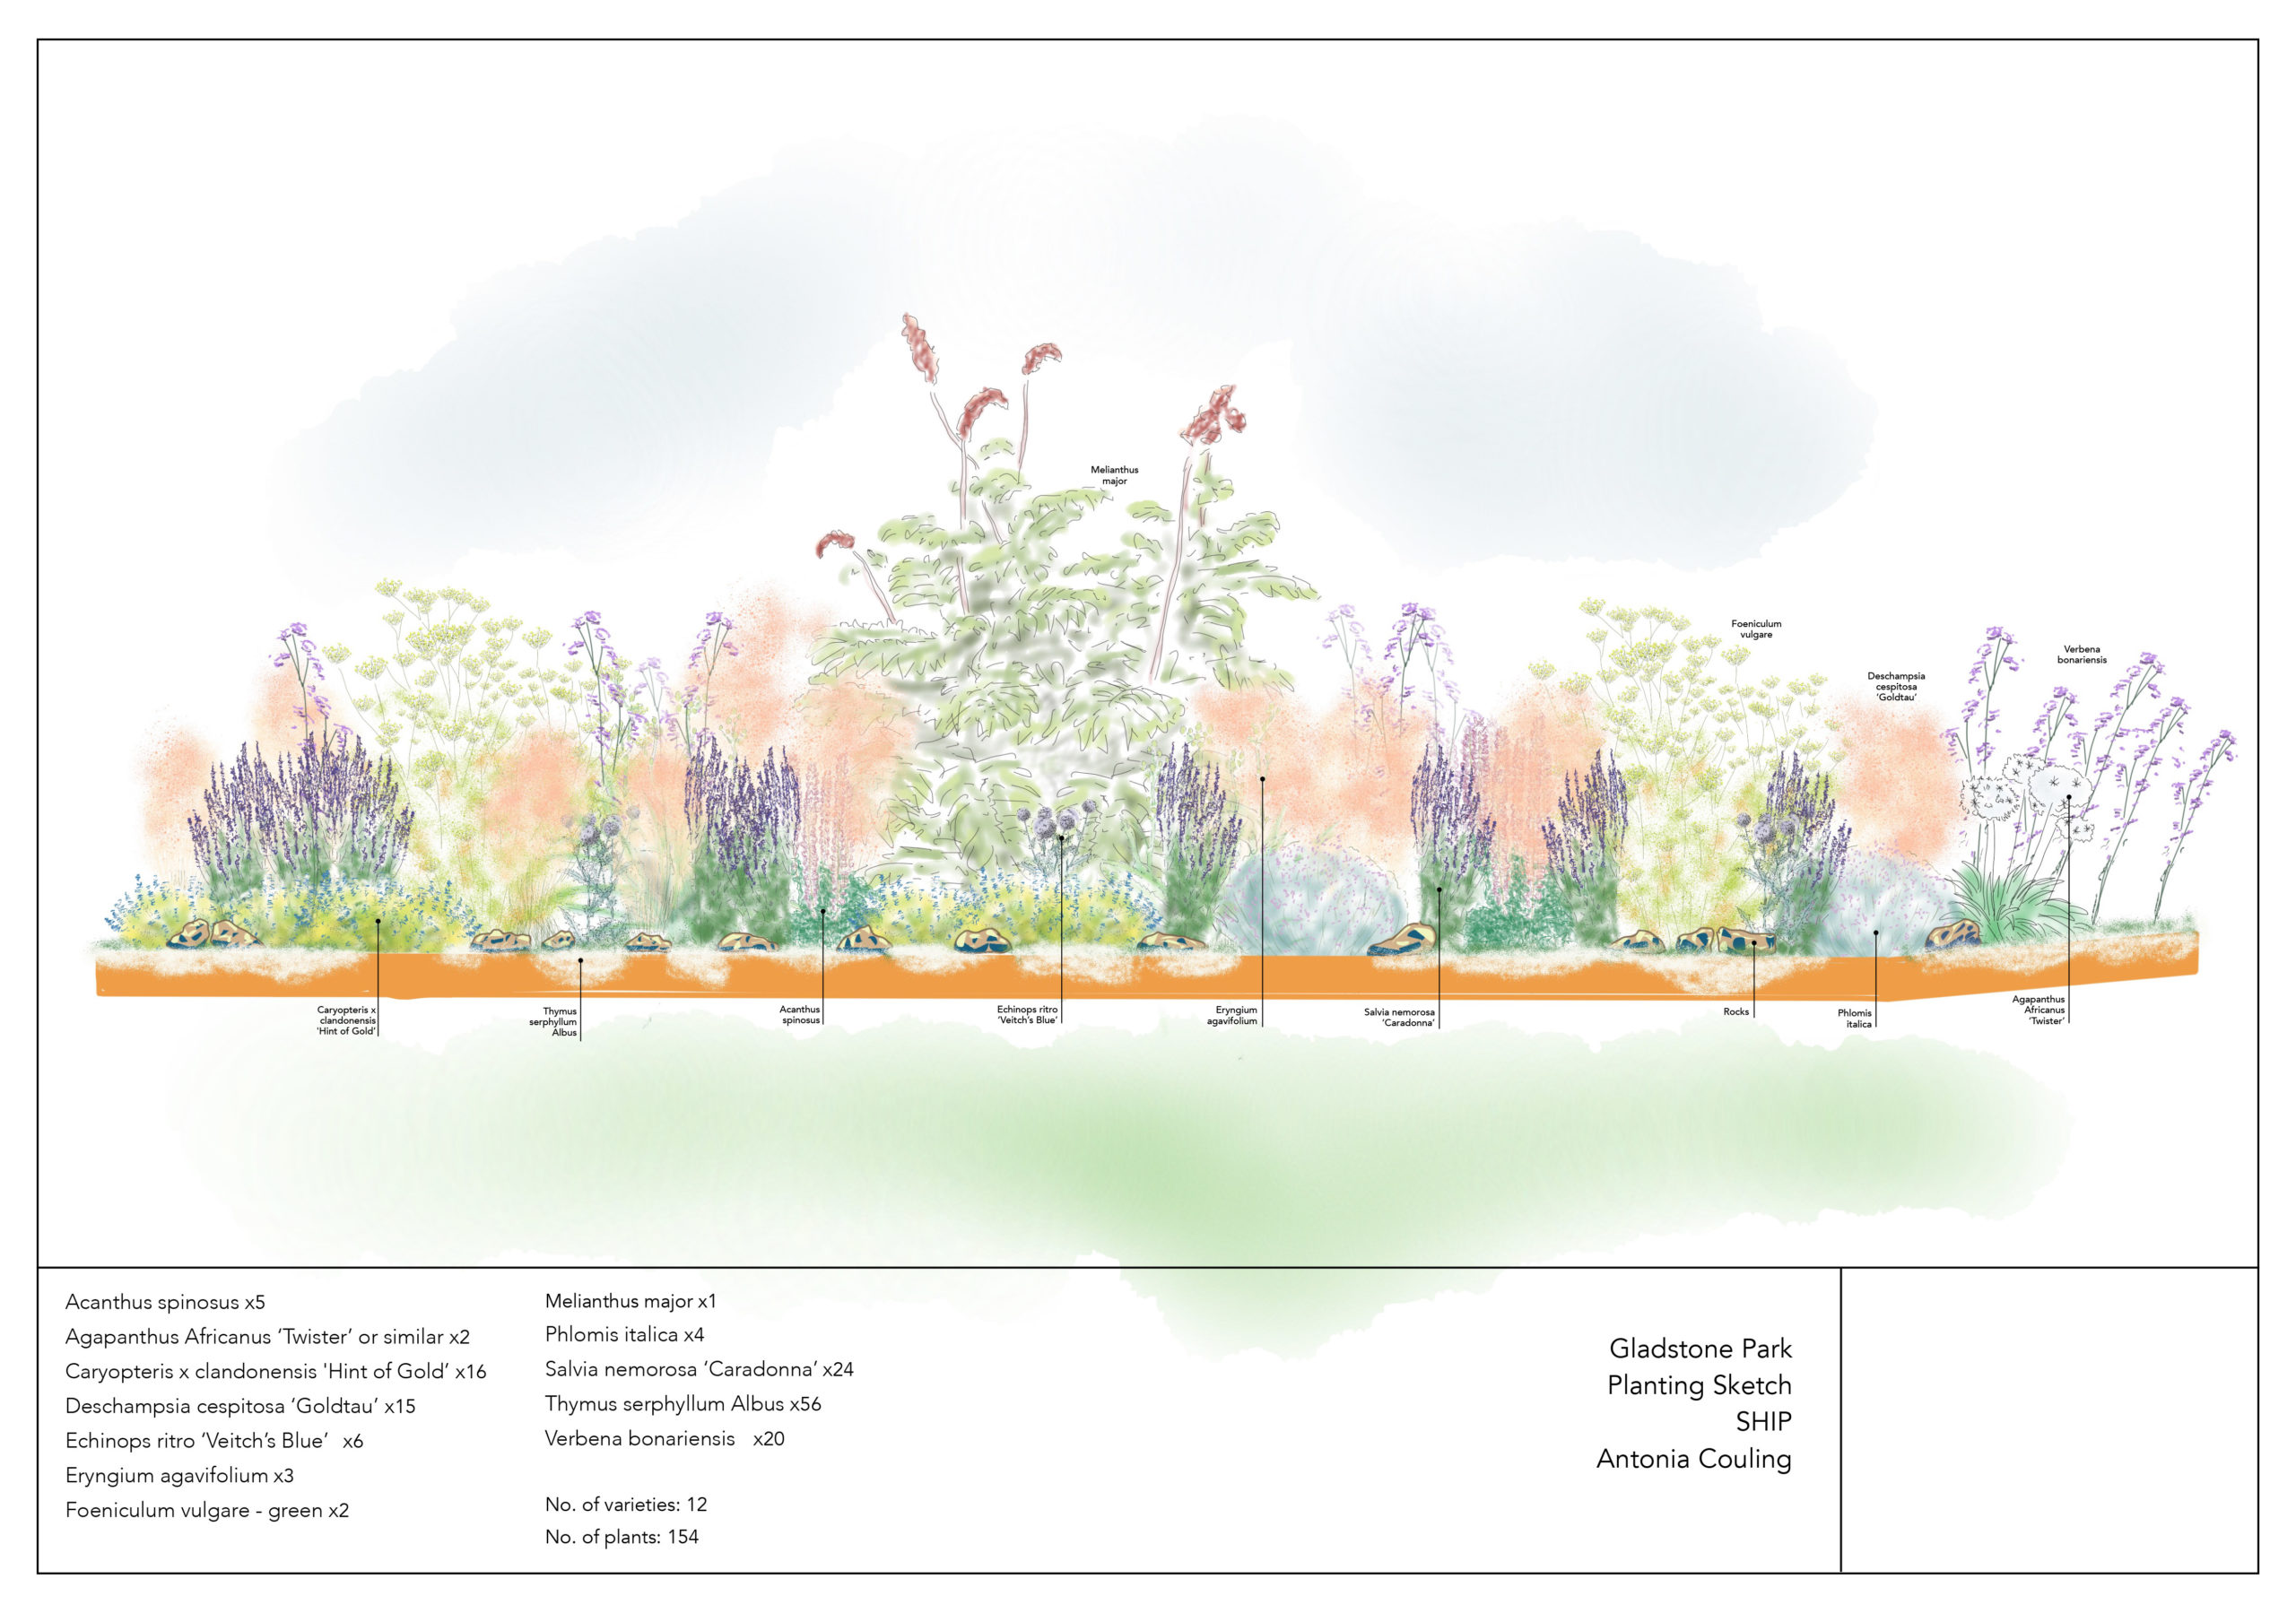 A3 PLANTING SKETCH - Gladstone Park Land Art - Antonia Couling -